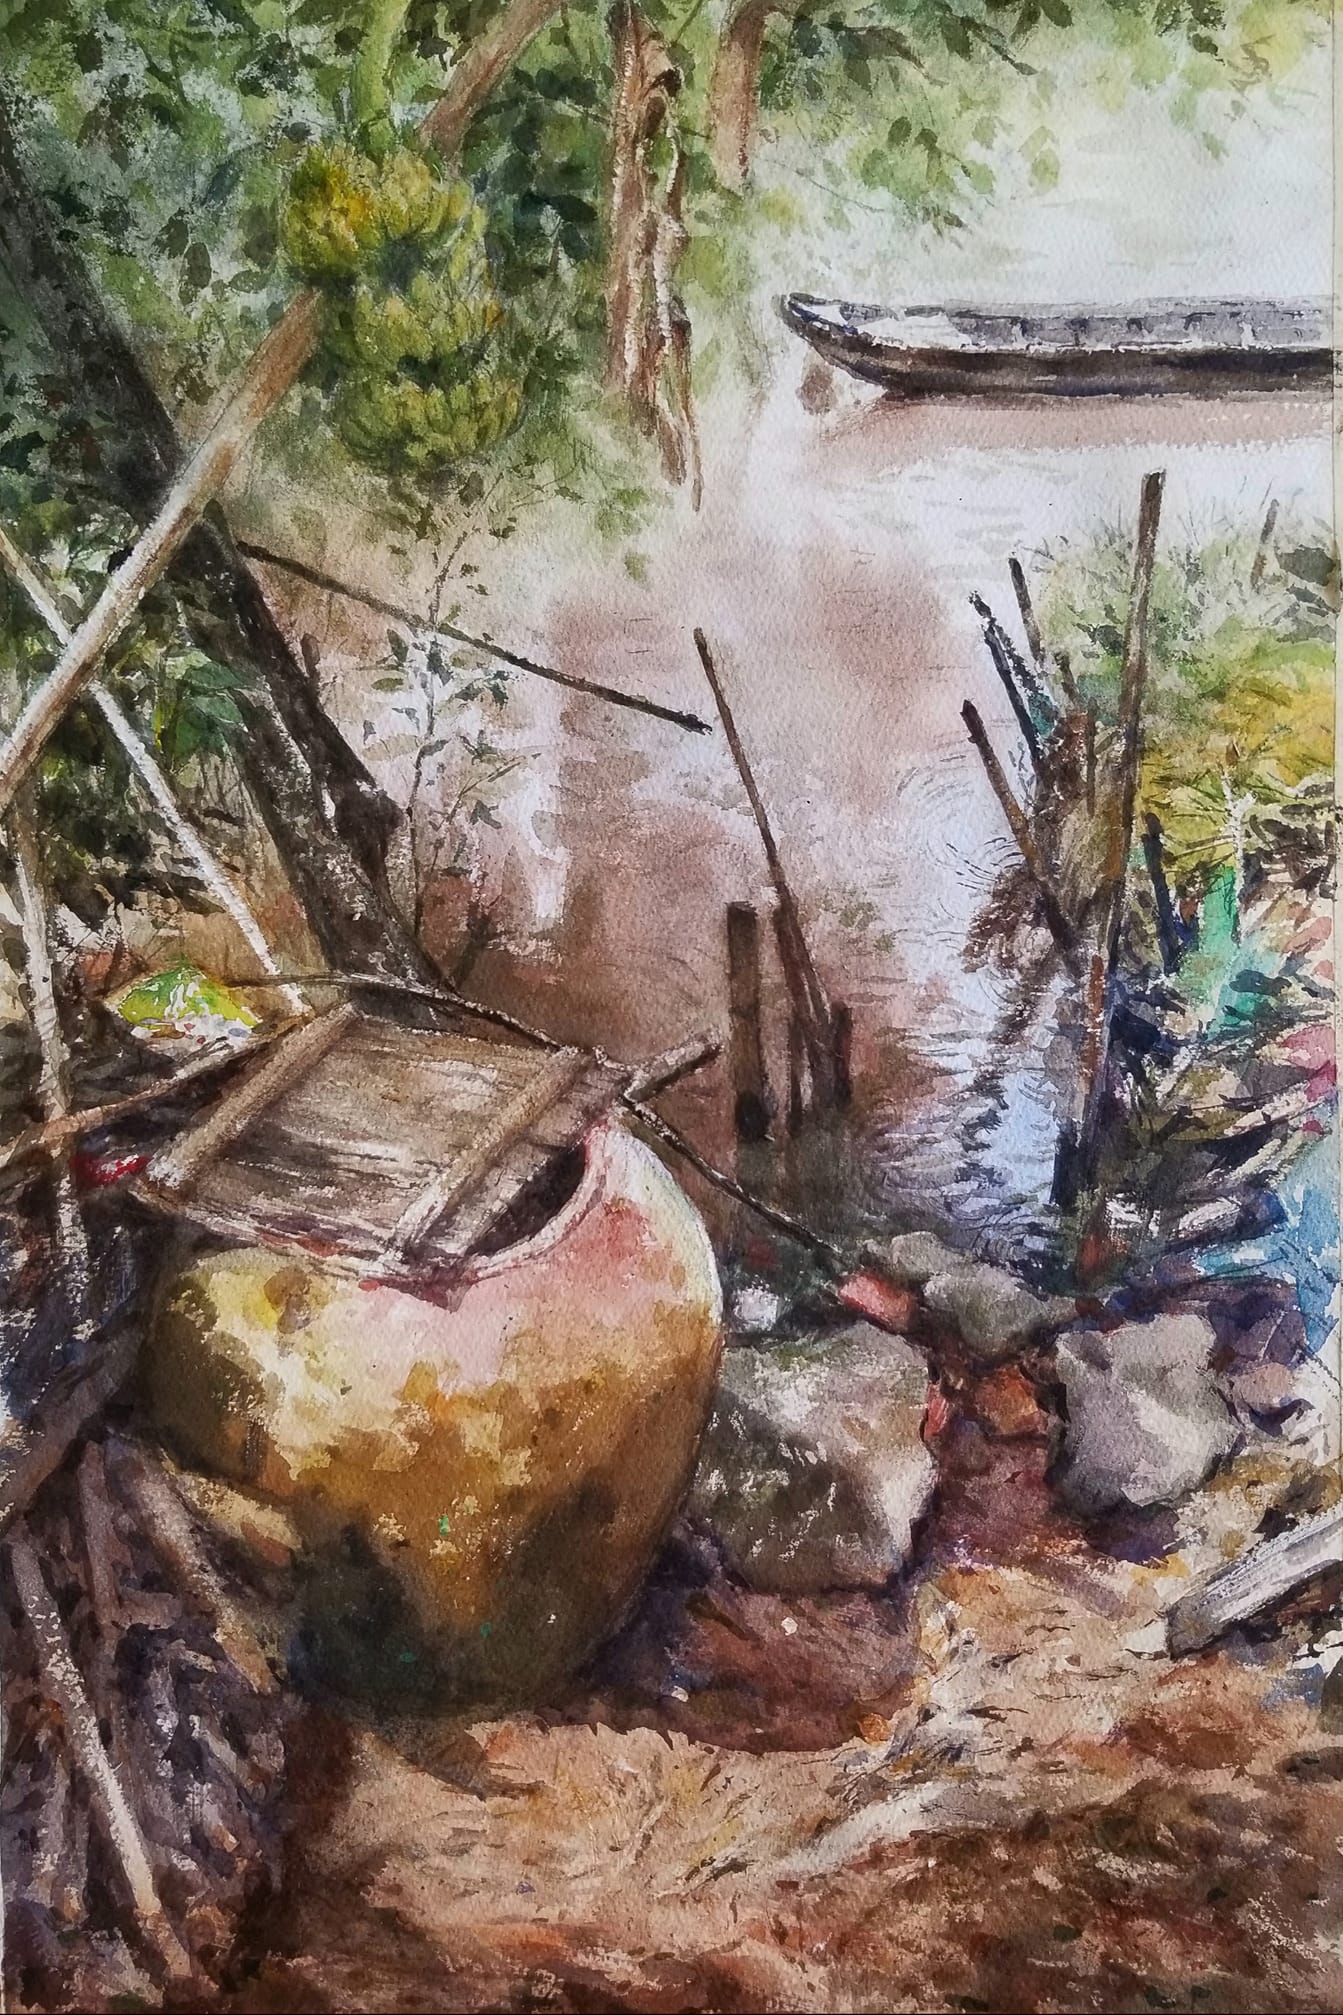 This painting by Vincent Monluc depicts a ceramic water jar by the verge of the Mekong River in Can Tho City.